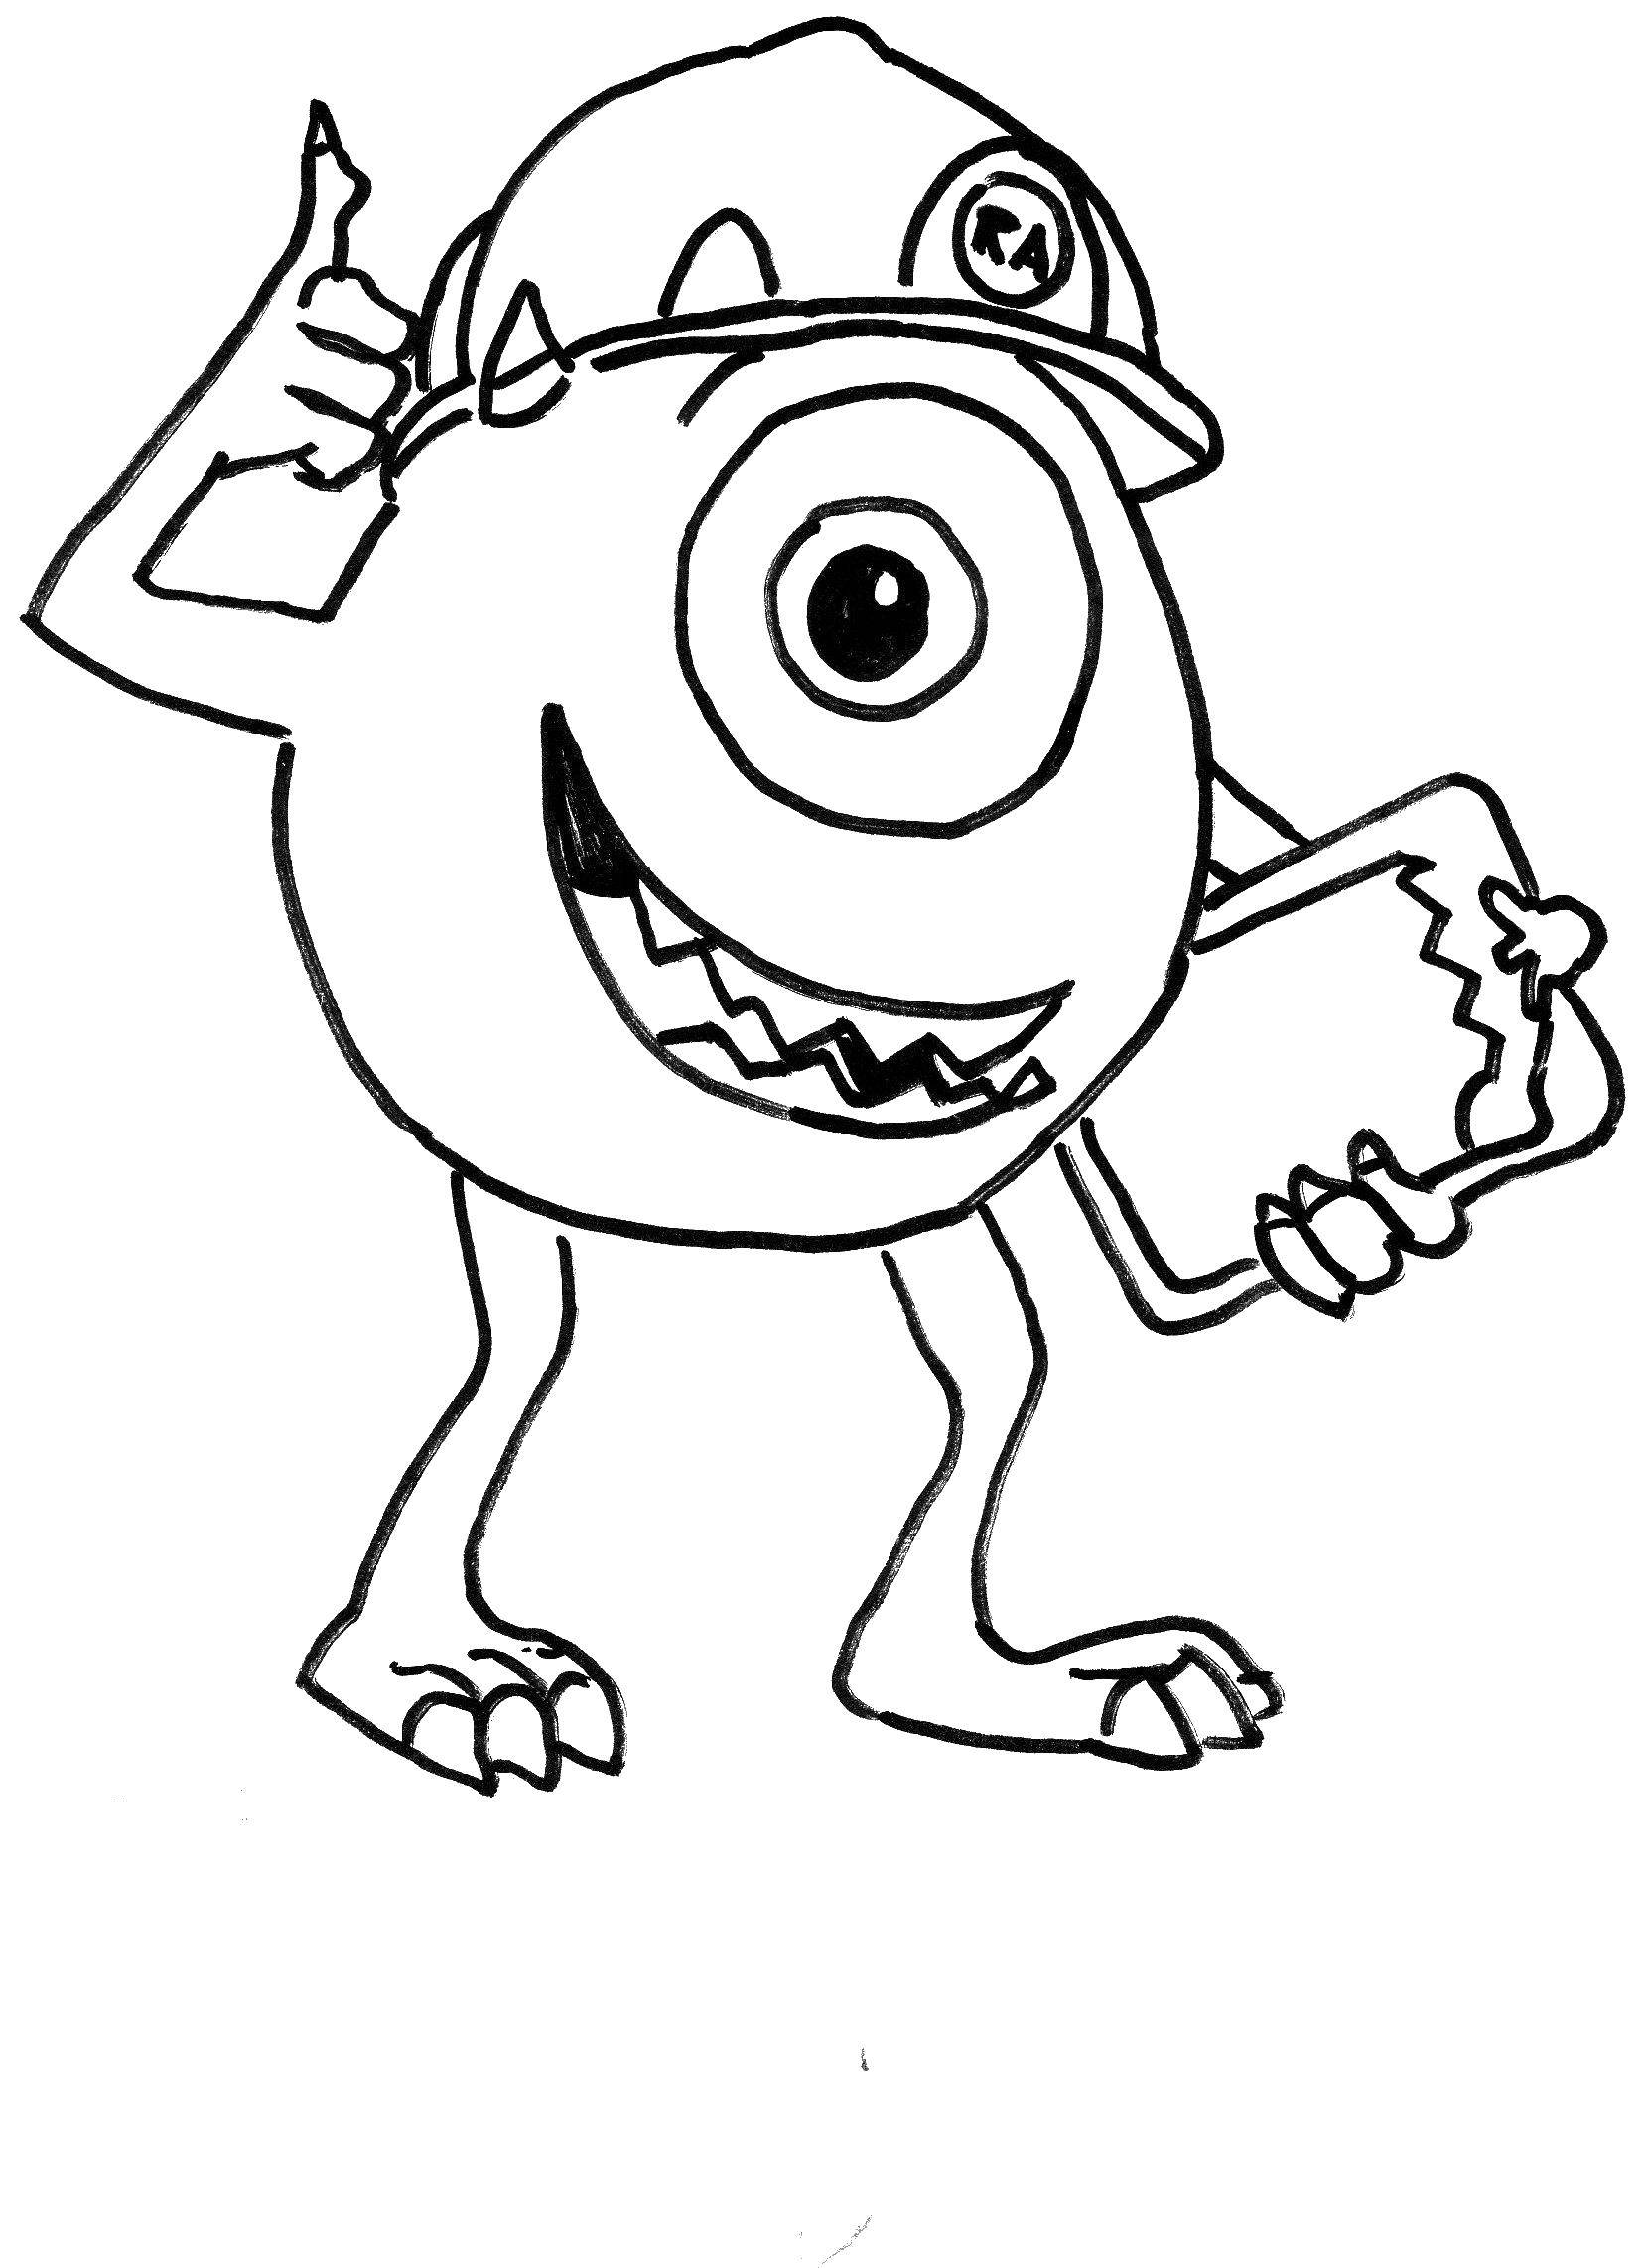 Coloring Mike wazowski. Category coloring monsters Inc. Tags:  Mike, the Corporation, monsters.